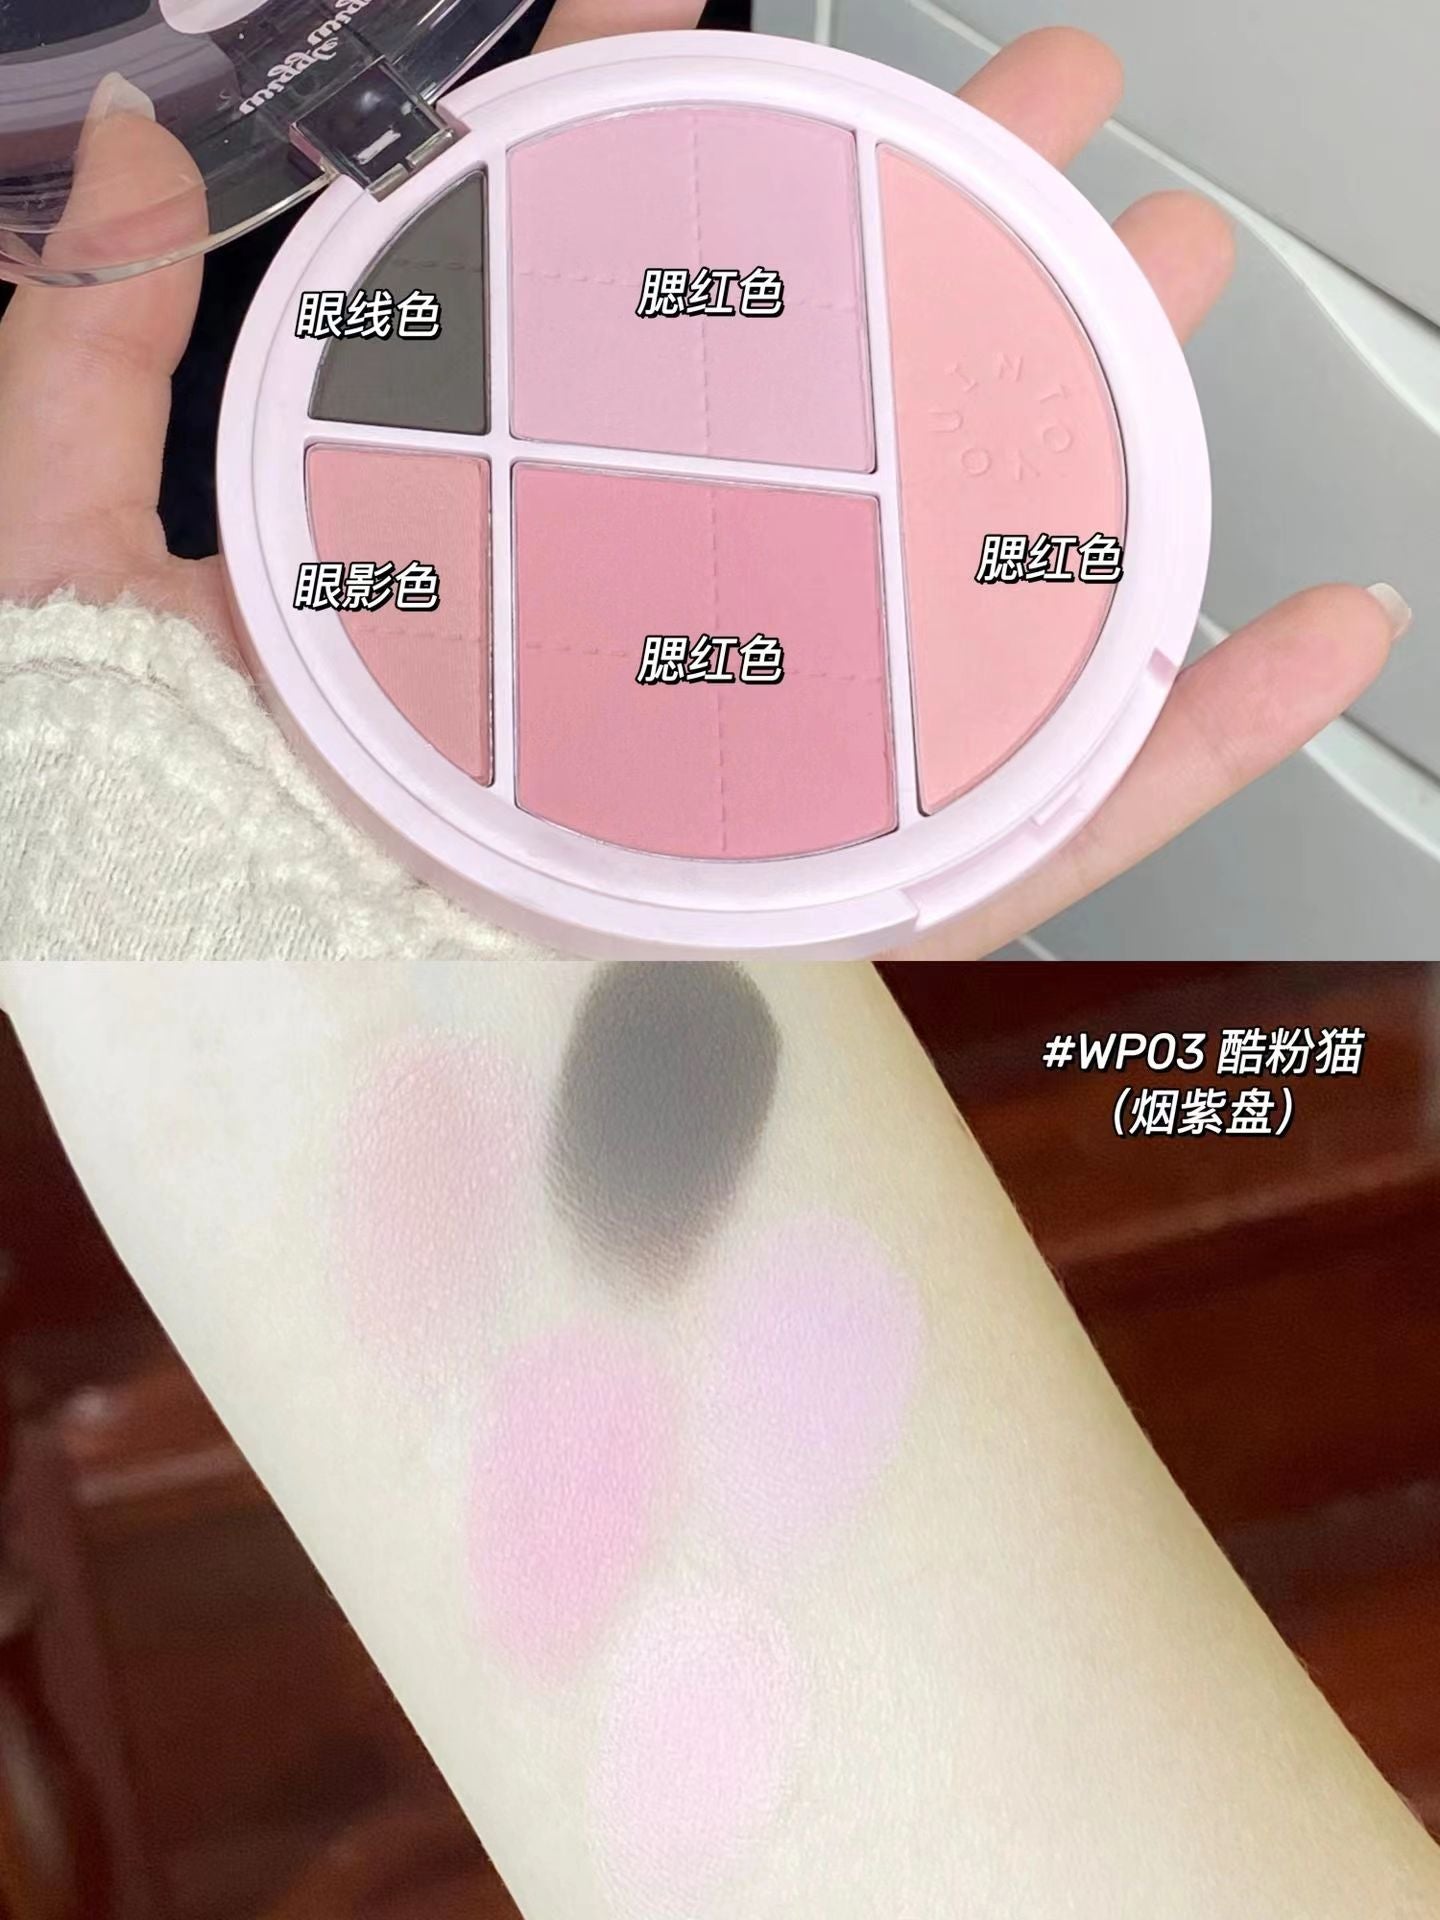 INTO YOU X Wiggle Wiggle All-In-One Matte Makeup Palette 12g 心慕与你 x Wiggle Wiggle五色综合盘